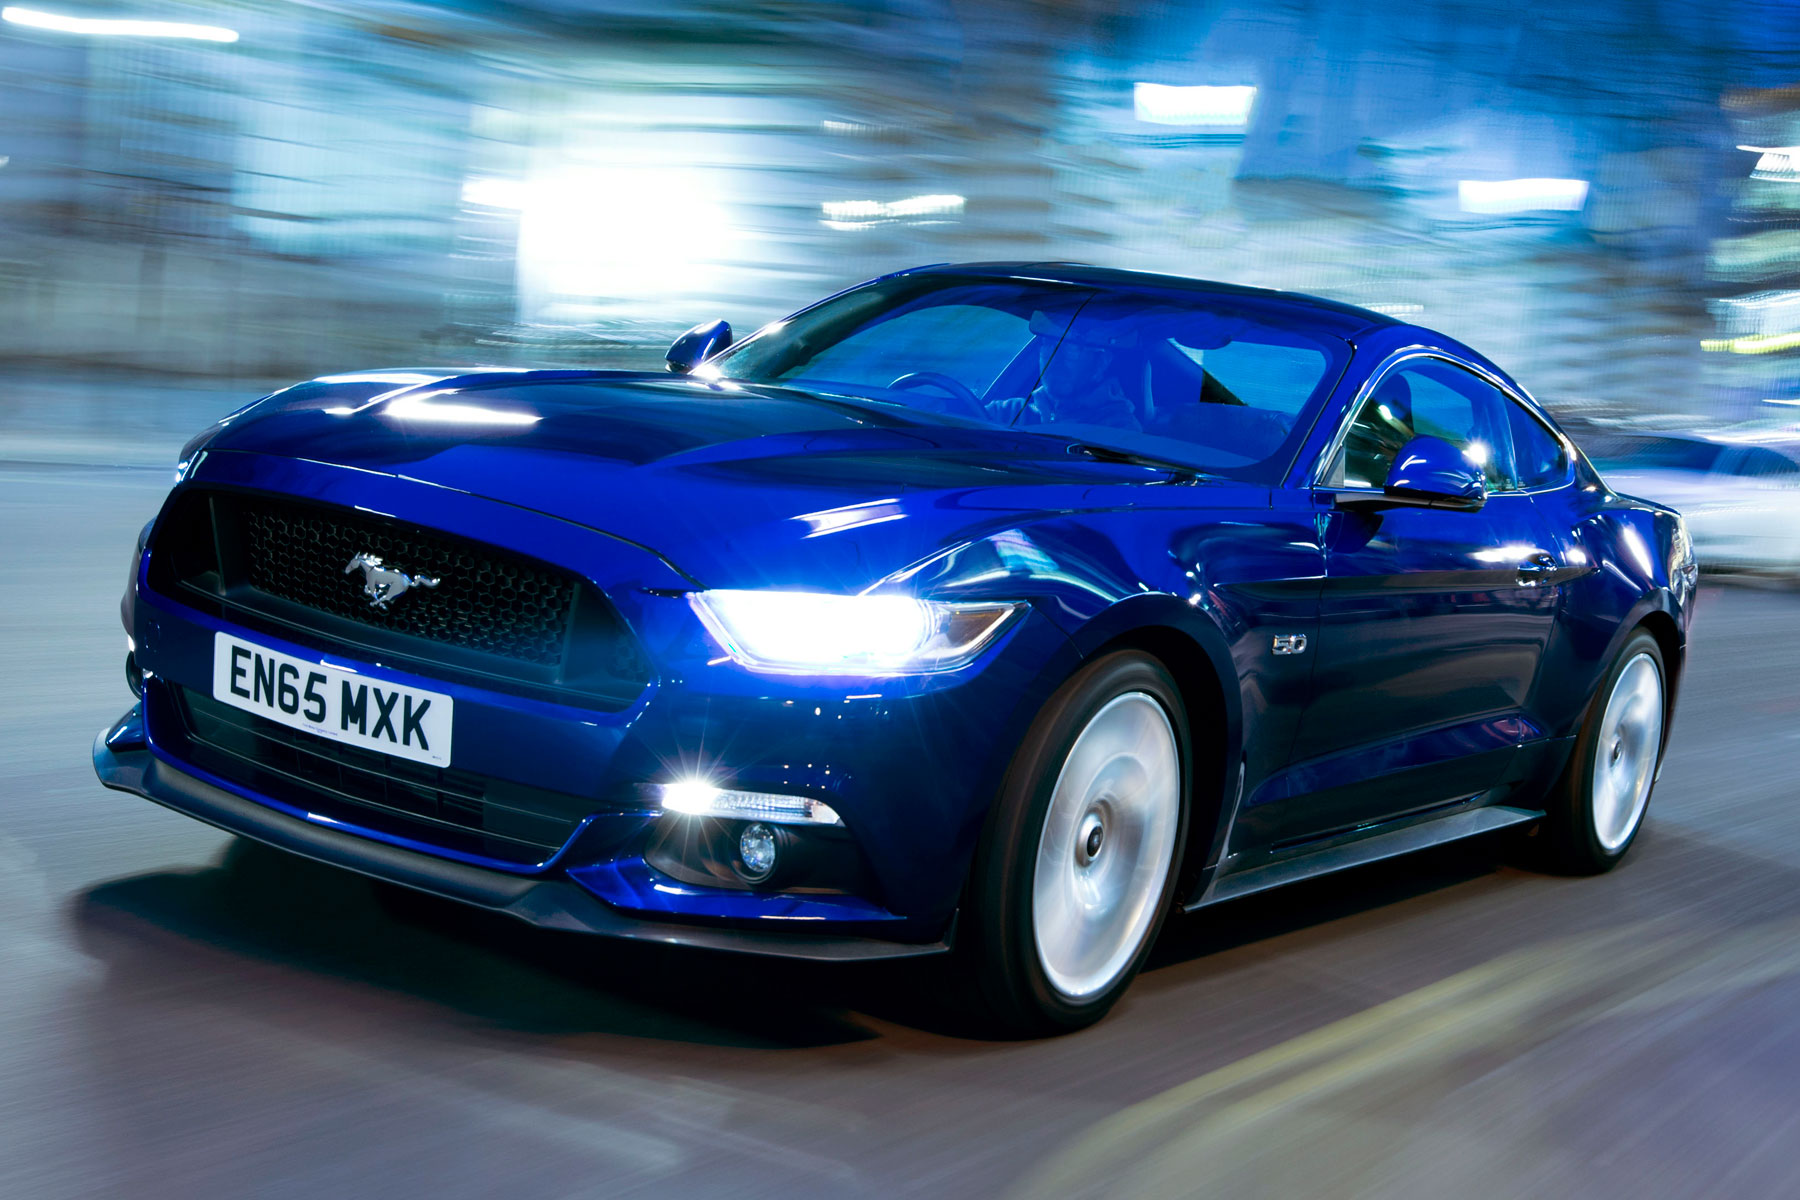 Ford to build an electric SUV and hybrid Mustang